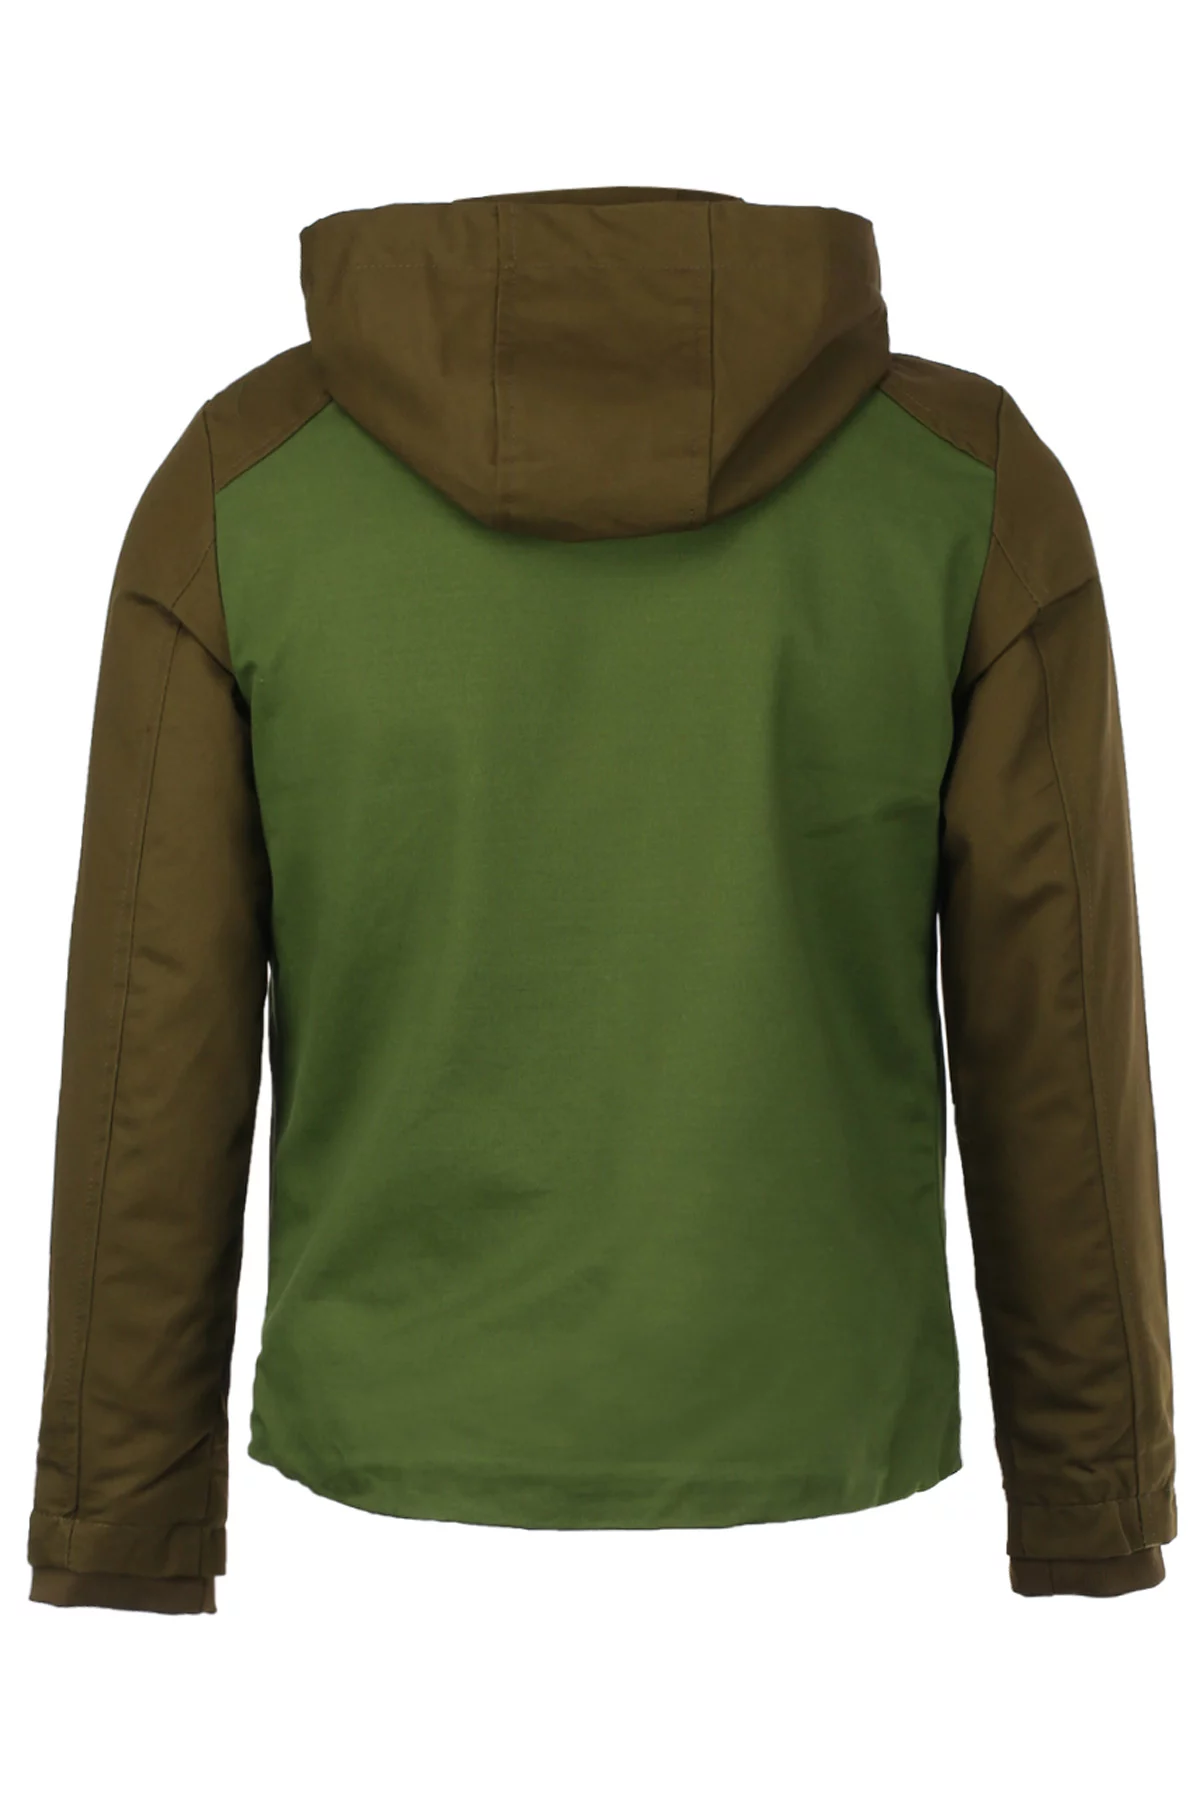 Slimming Hooded PU Leather Applique Rib Spliced Hit Color Zipper Design Long Sleeves Jacket For Men Army Green